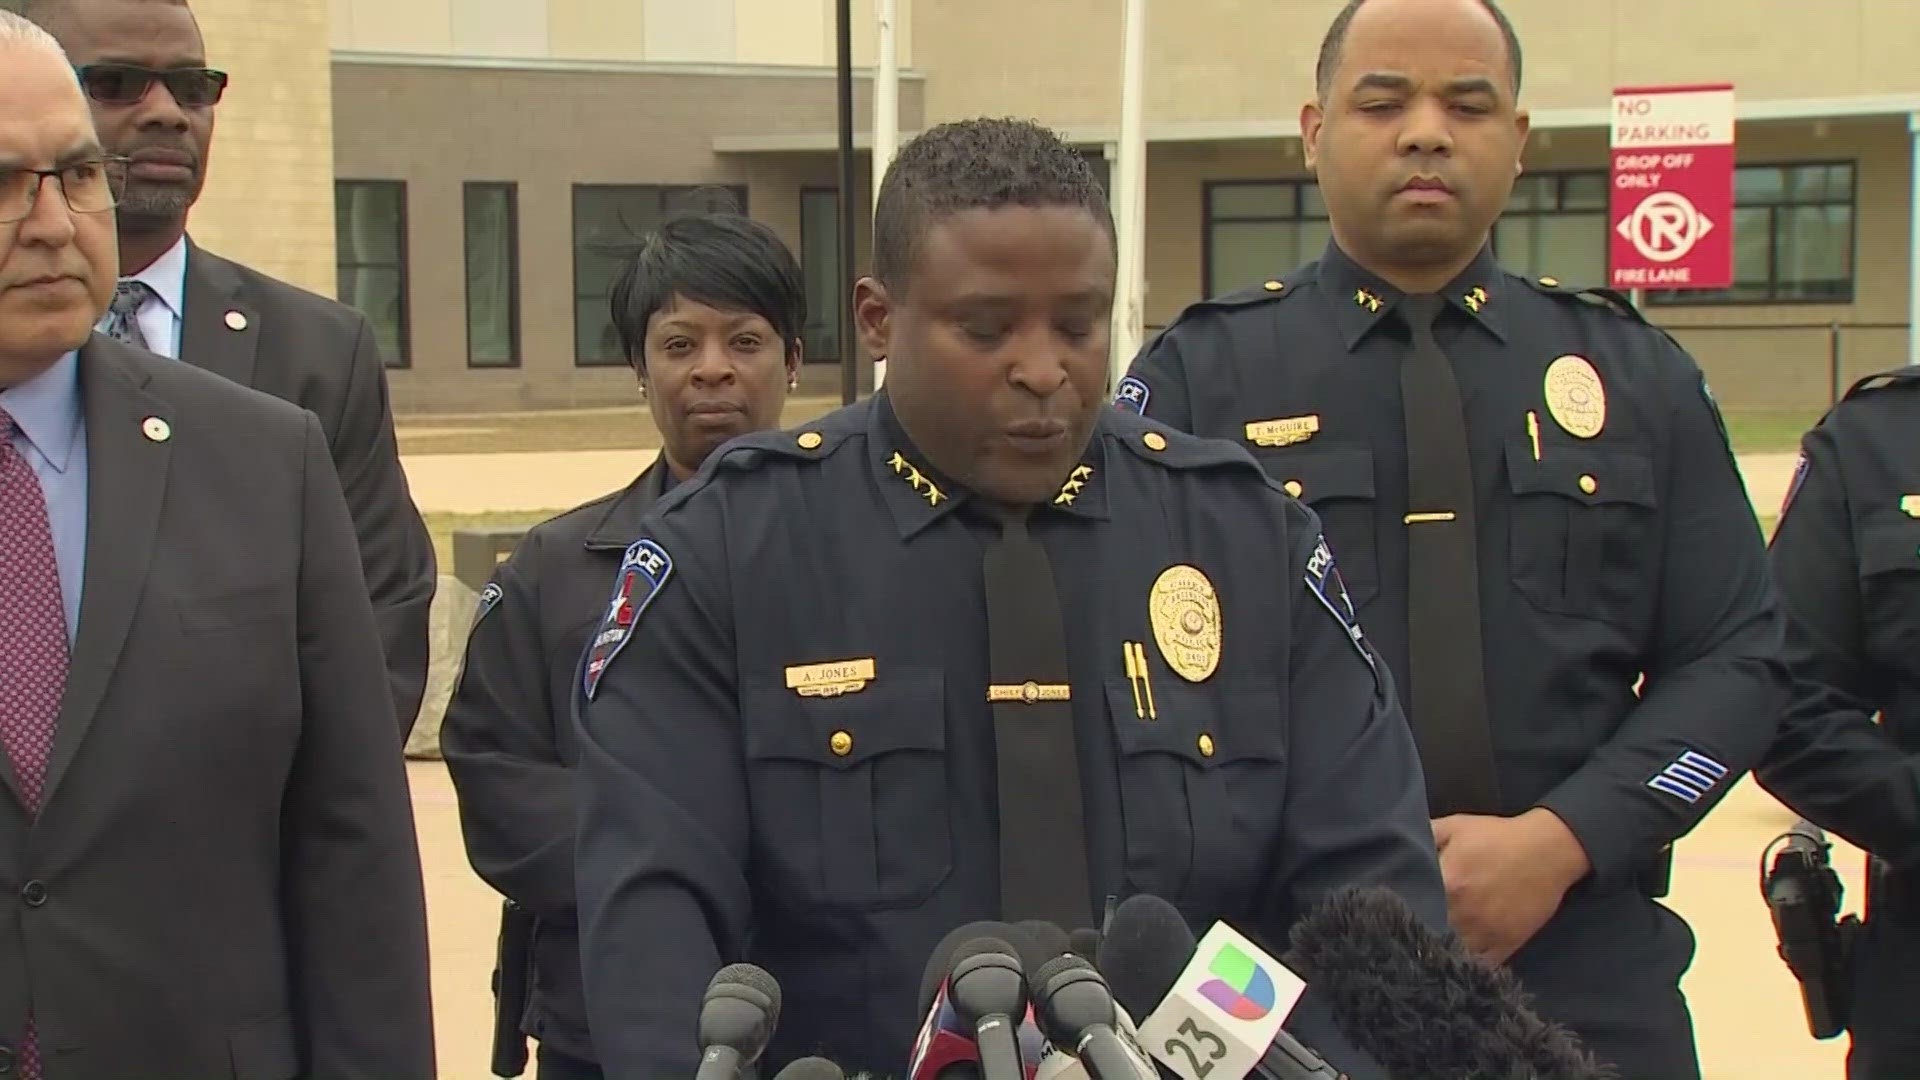 Officials held a press conference Monday after local police said Lamar High School was put on lockdown due to a shooting.